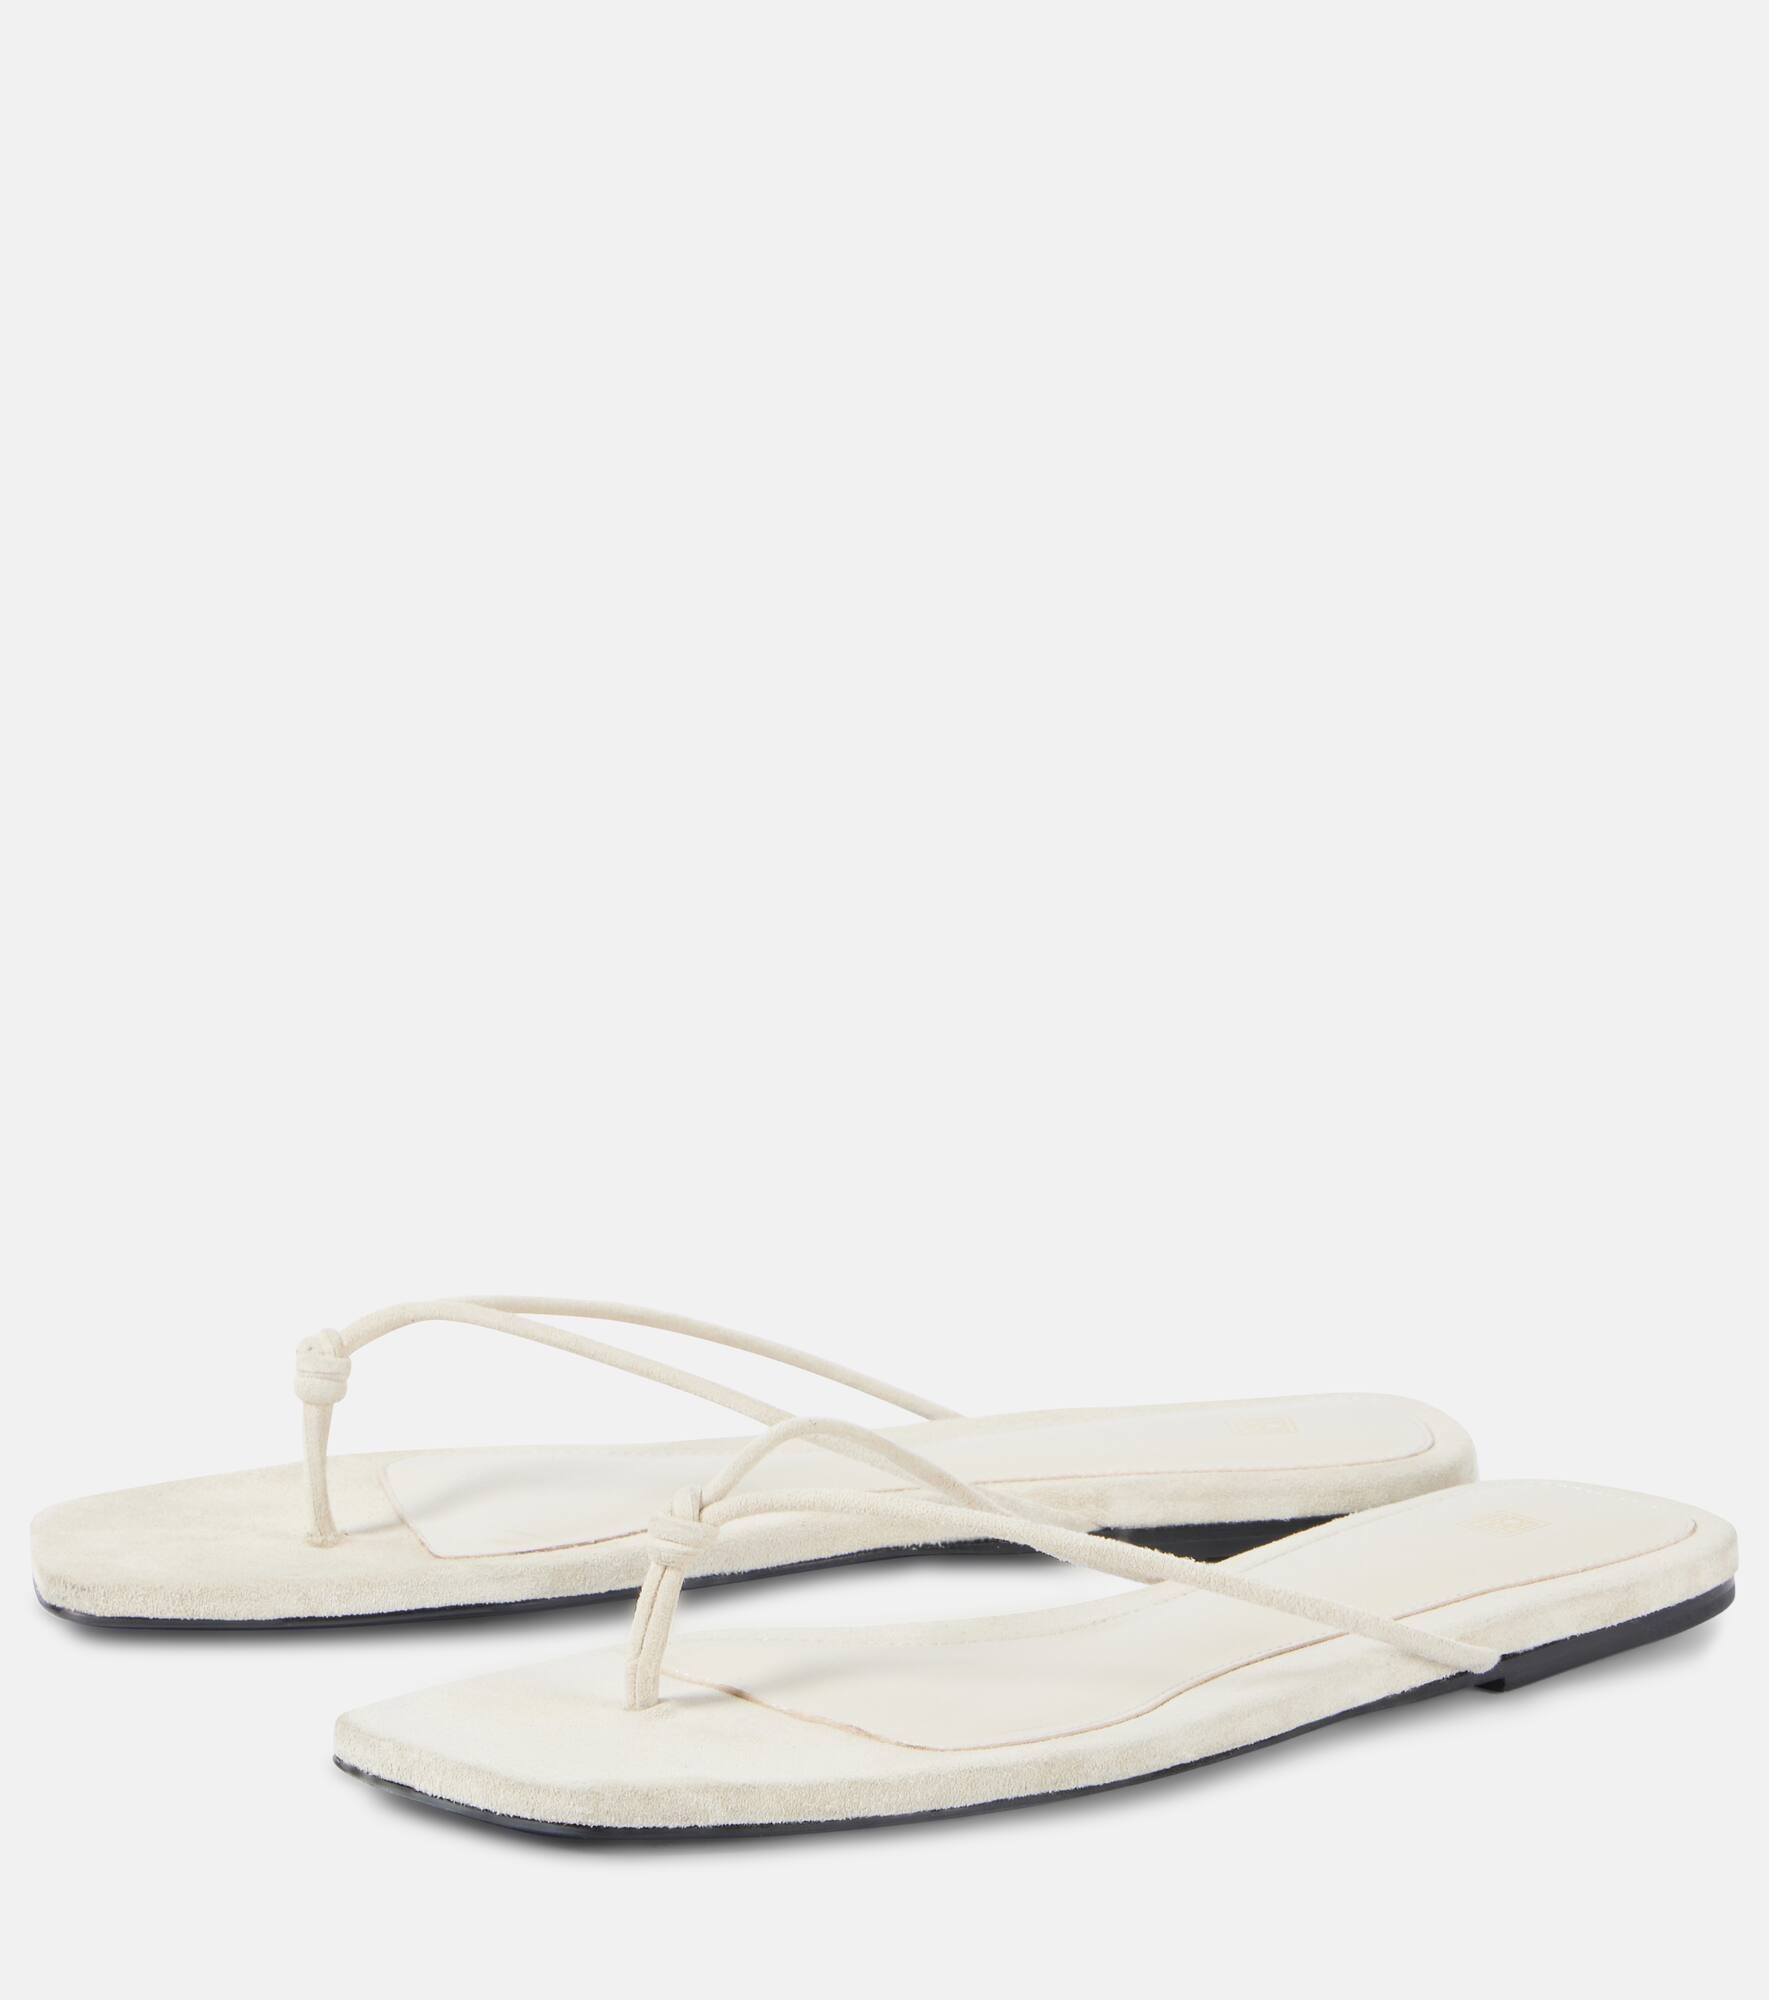 The Knot suede thong sandals - 5